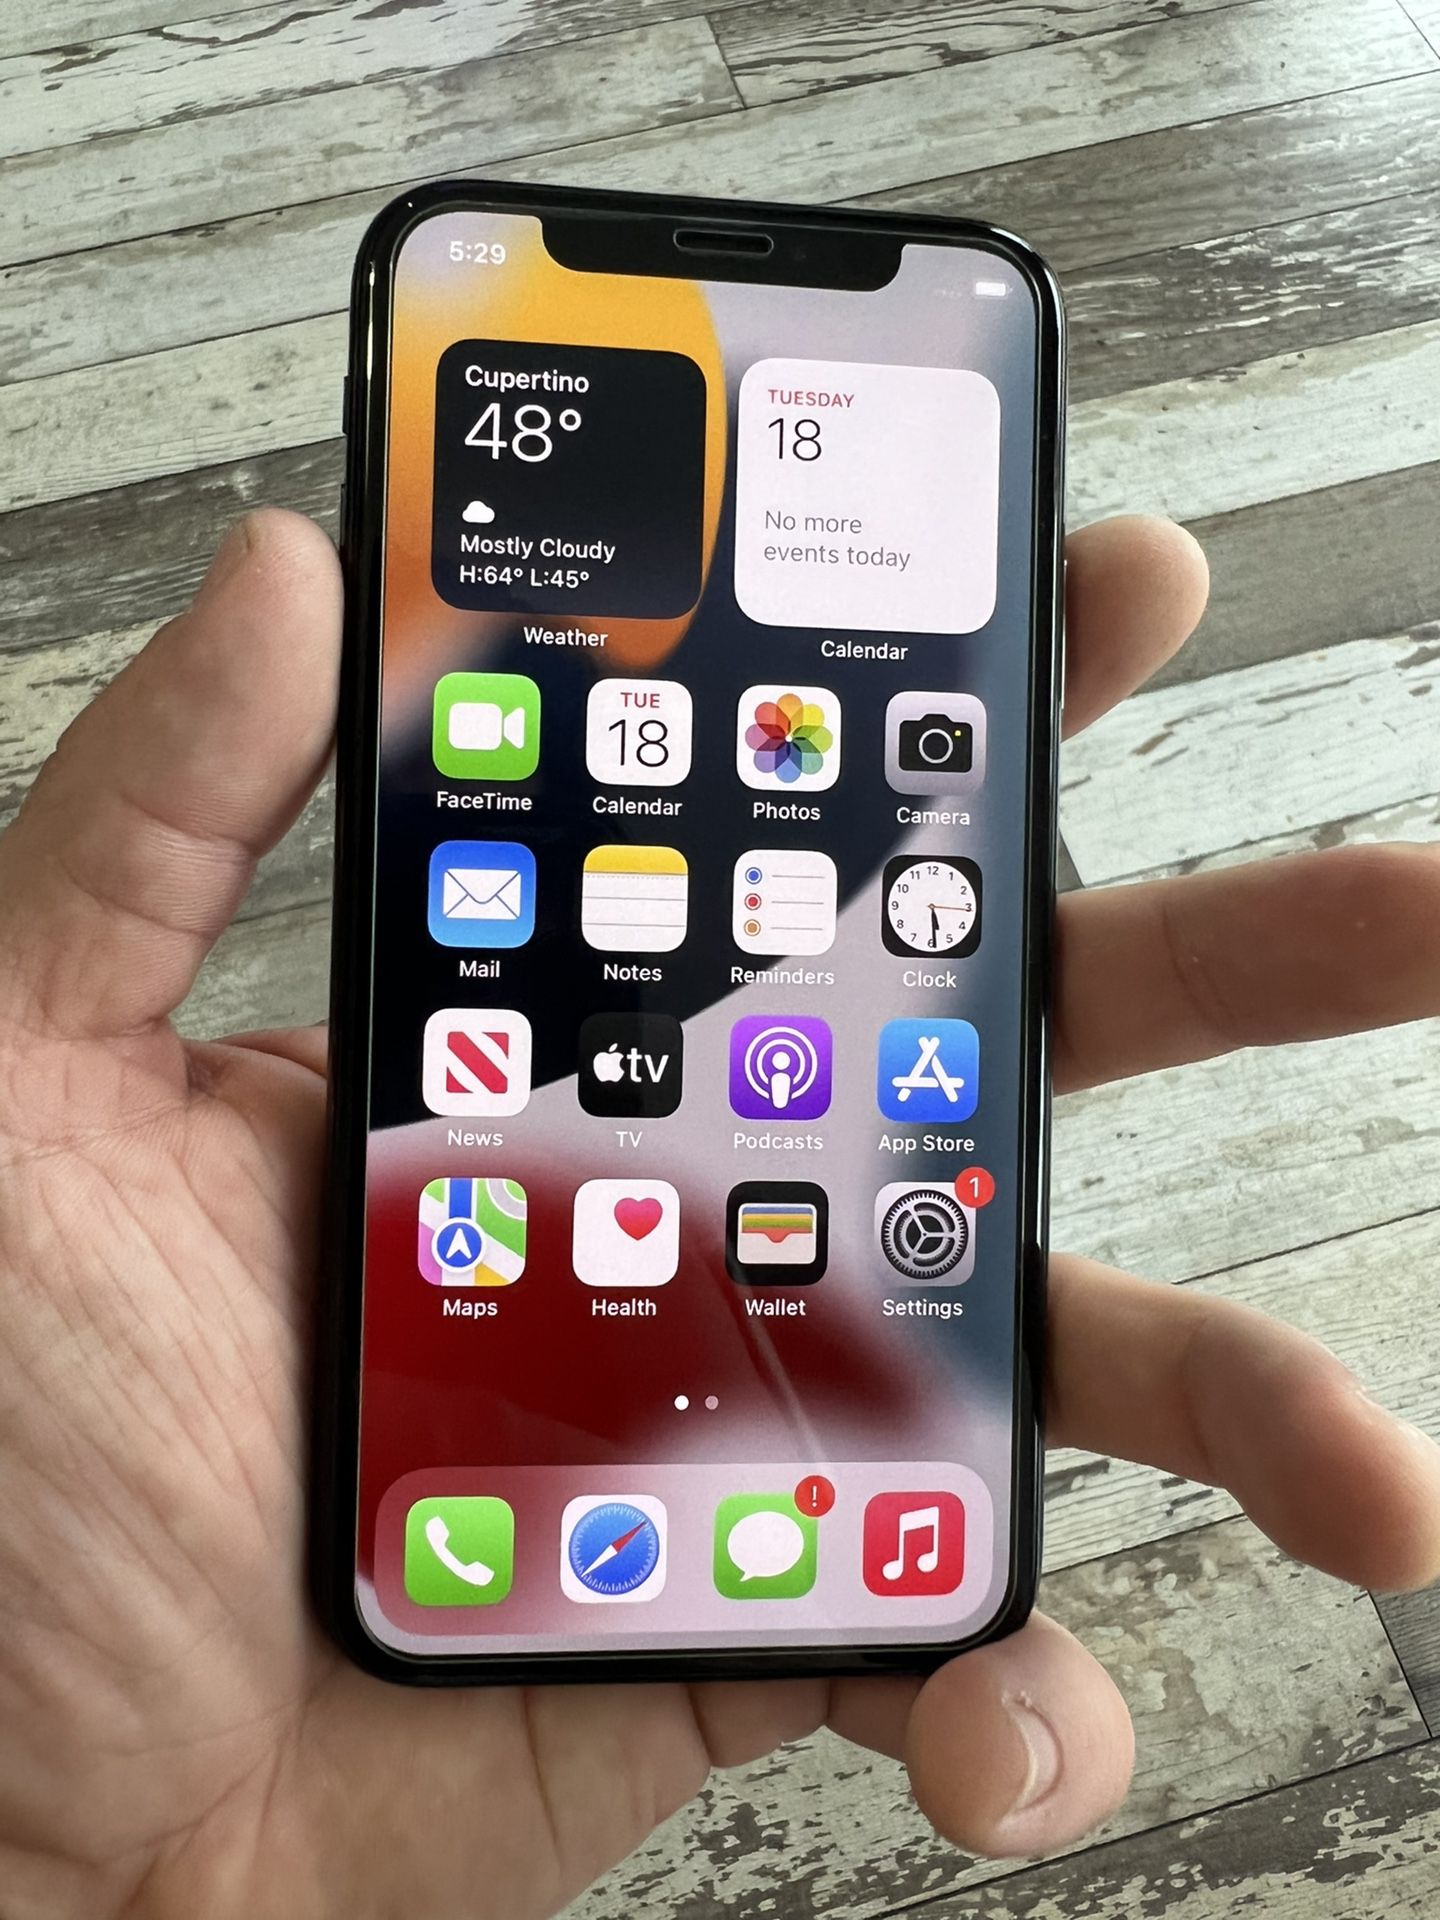 iPhone X W/ New Tempered Glass And Charger 